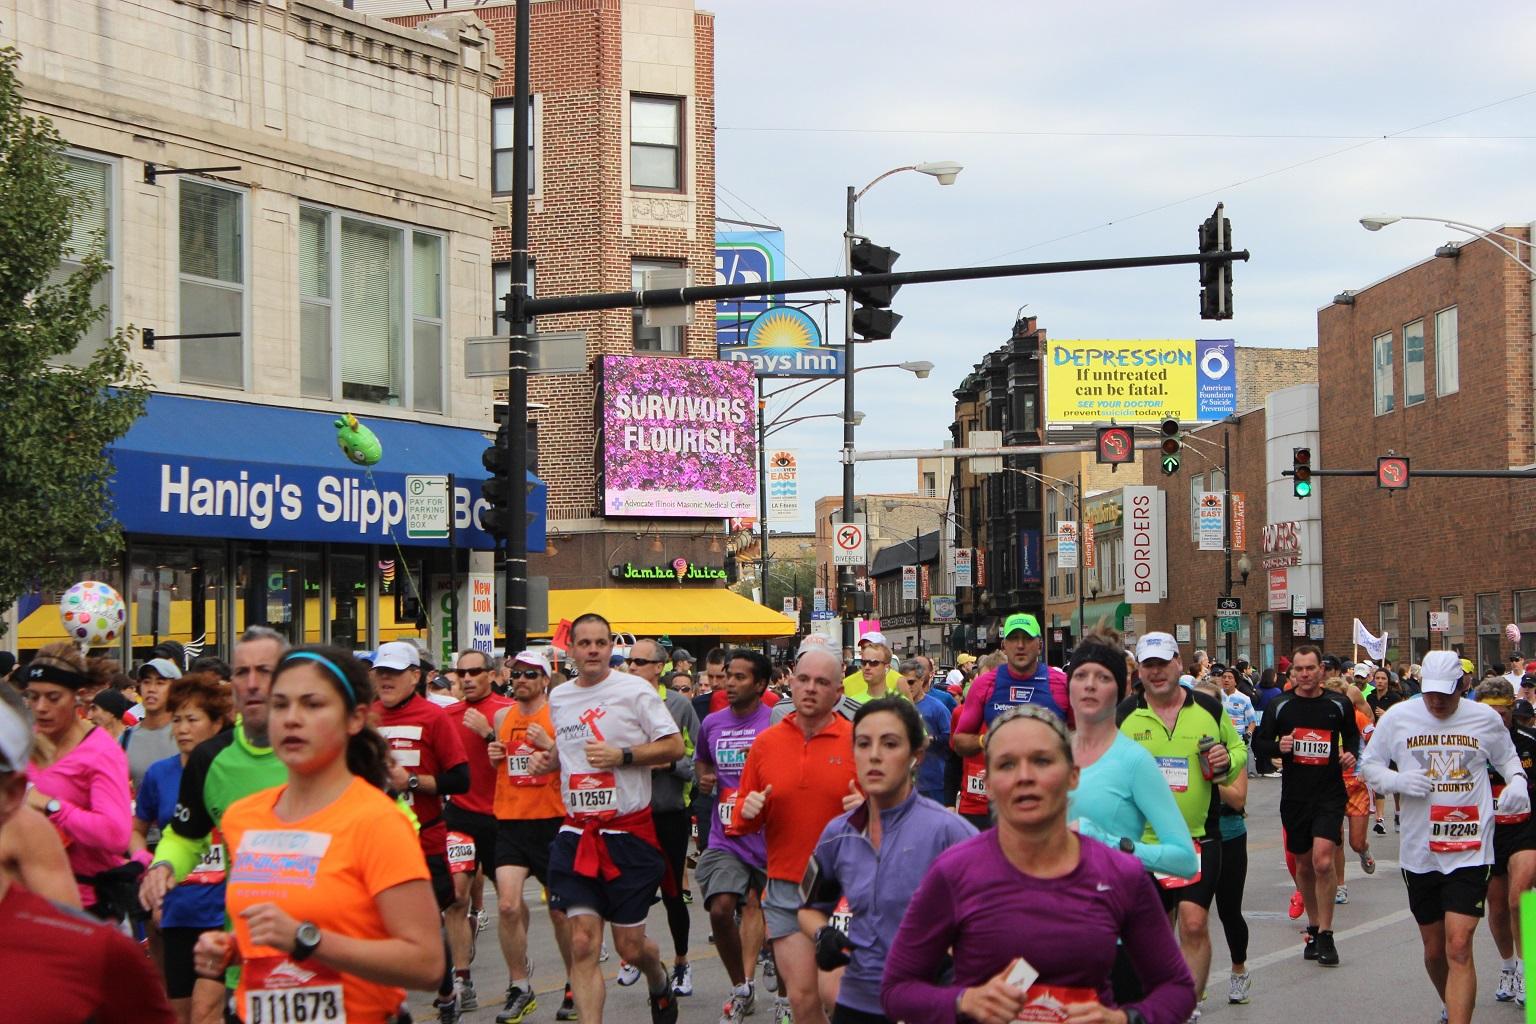 Runners participate in the 2012 Chicago Marathon near the intersection of Clark Street and Diversey Parkway. (Benjamin Lipsman / Flickr)